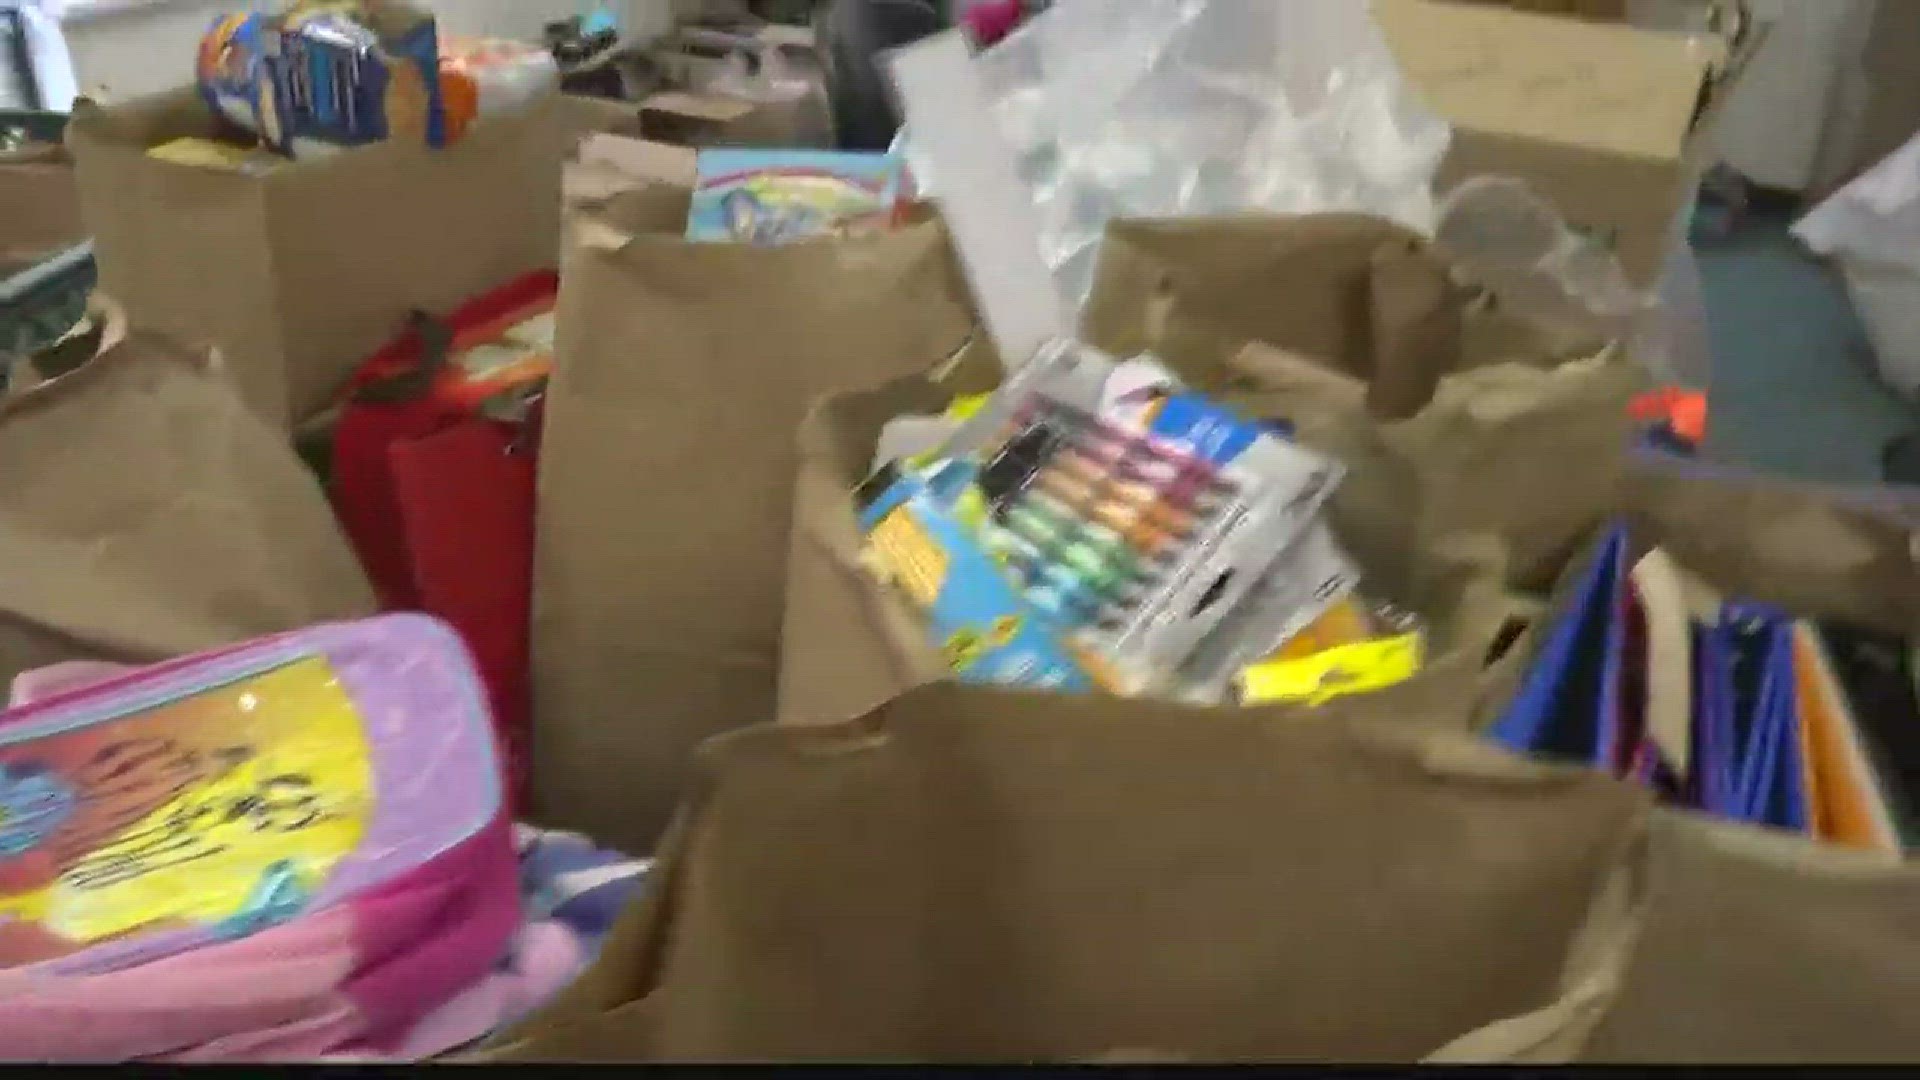 Instead of presents, a Williamsburg boy asked friends and family to donate food, school supplies for his birthday.